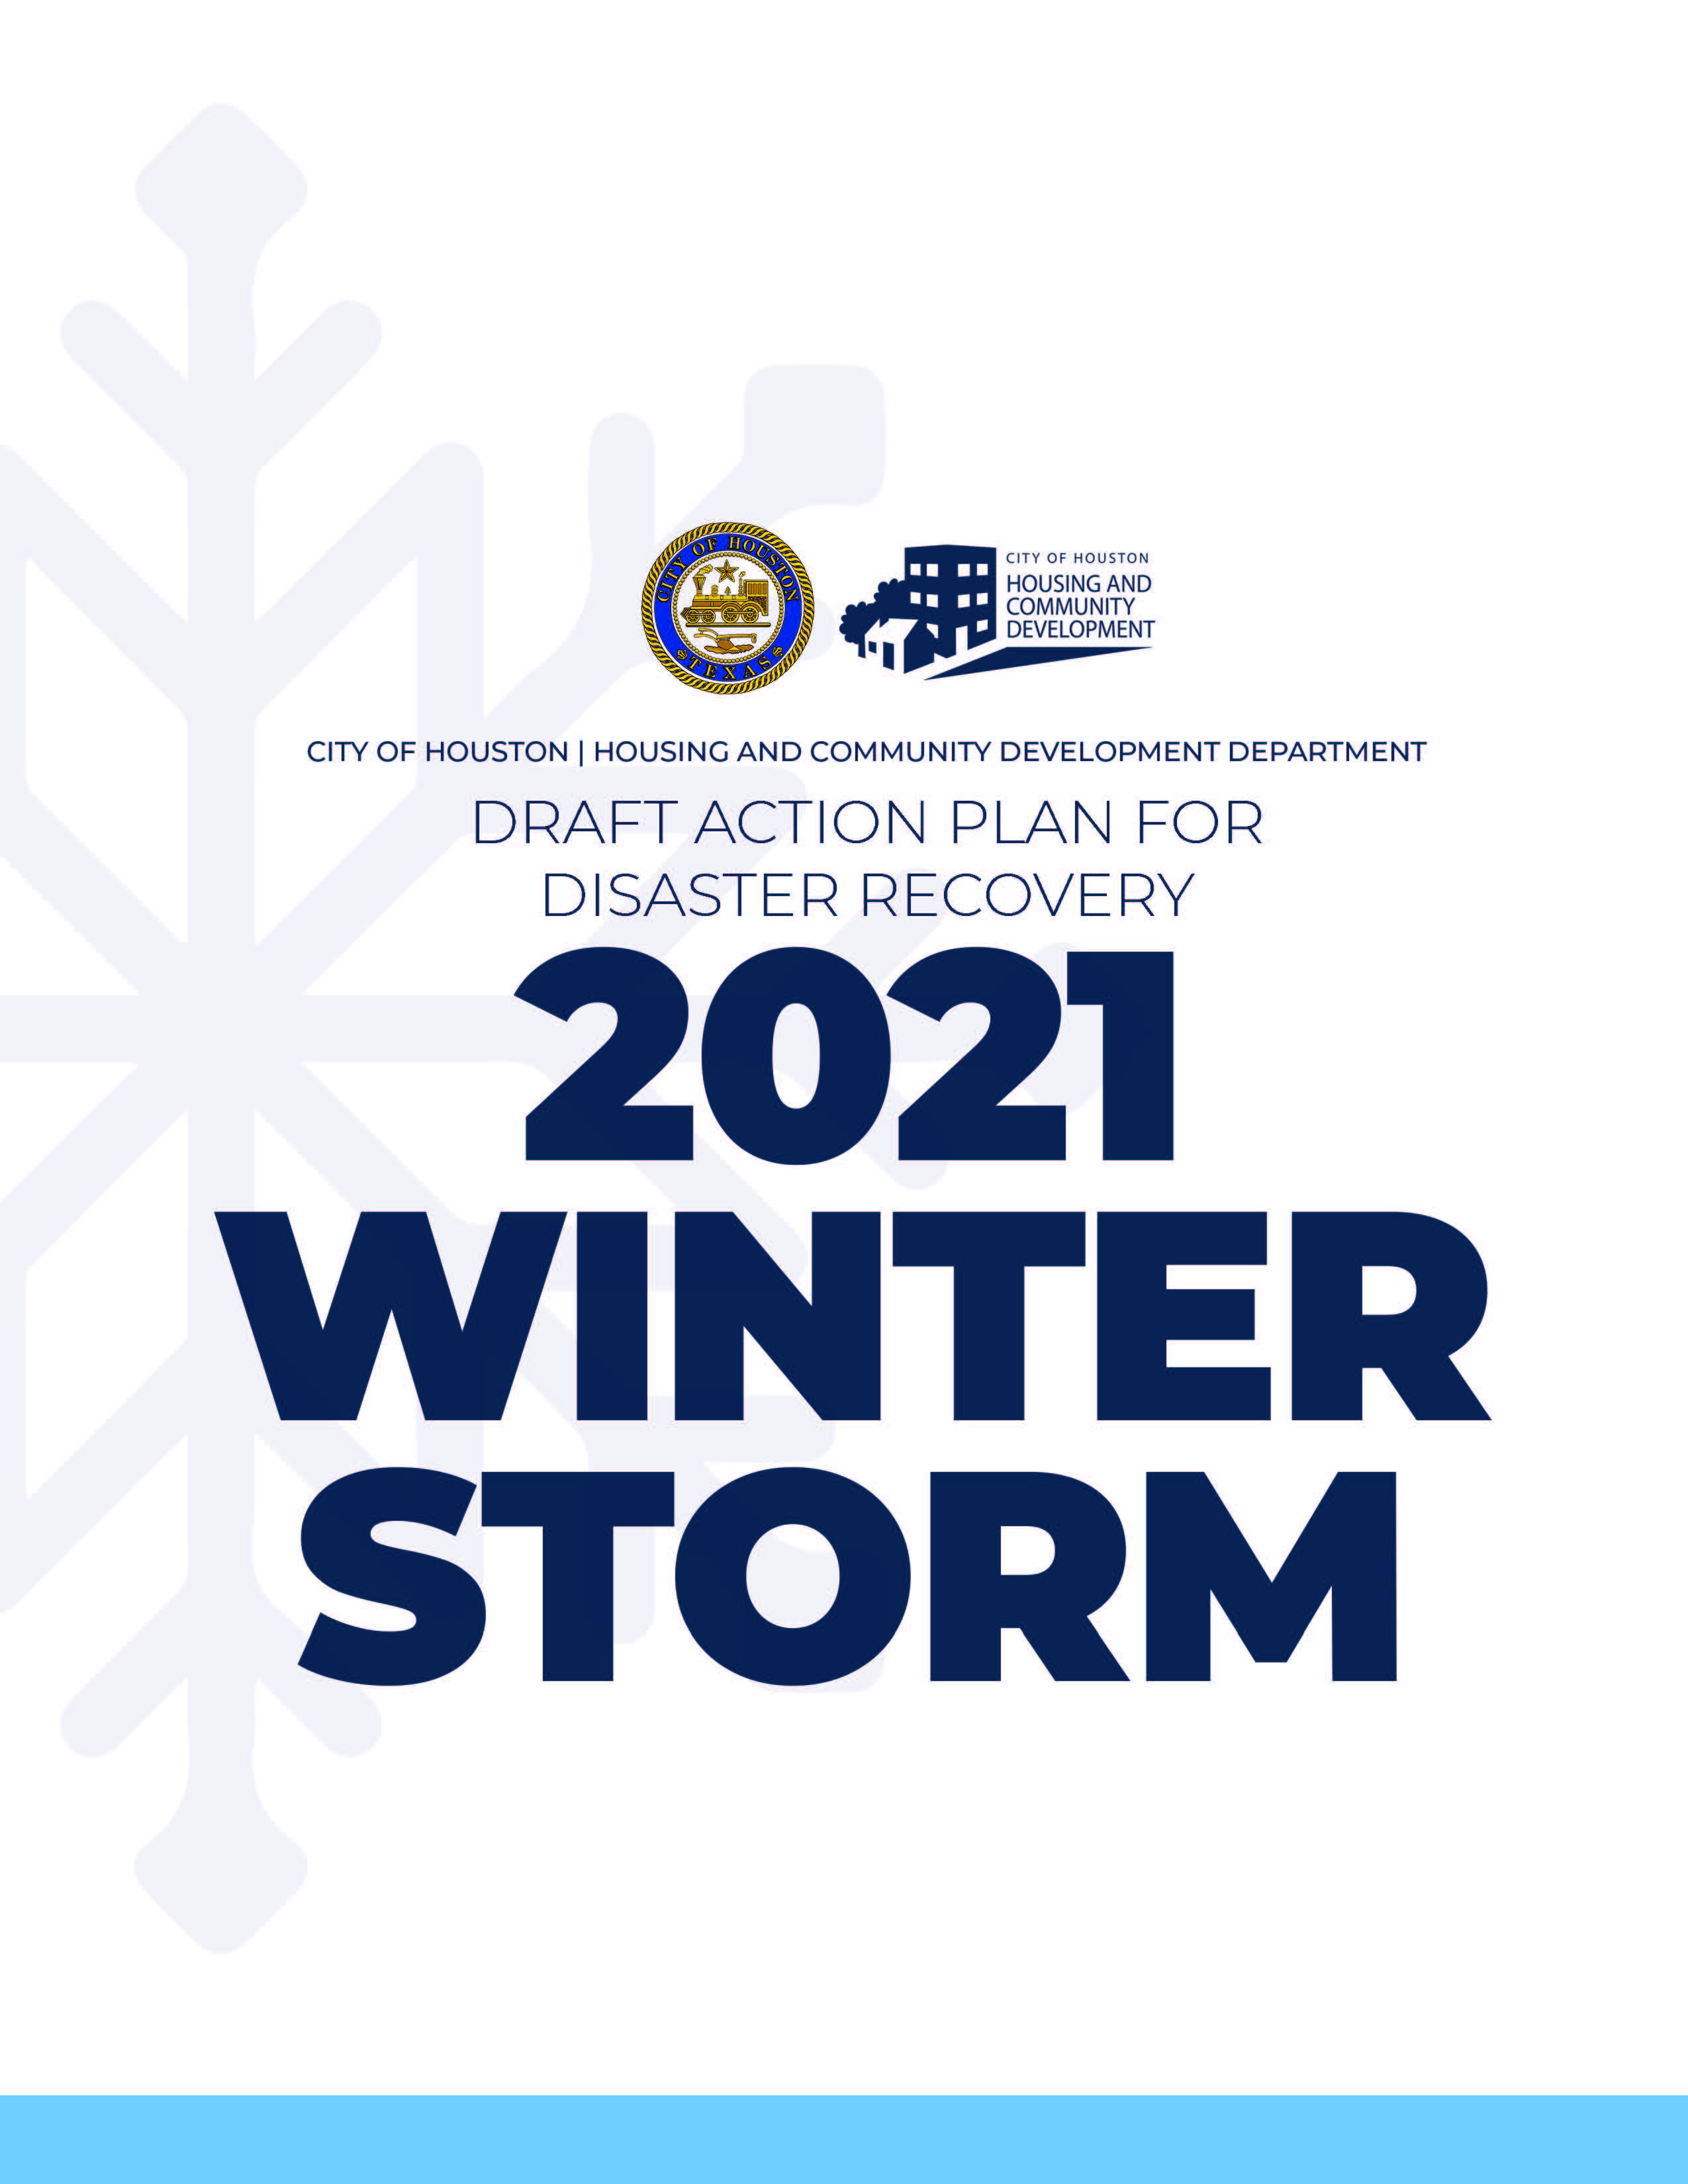 Draft Action Plan for Disaster Recovery-2021 Winter Storm